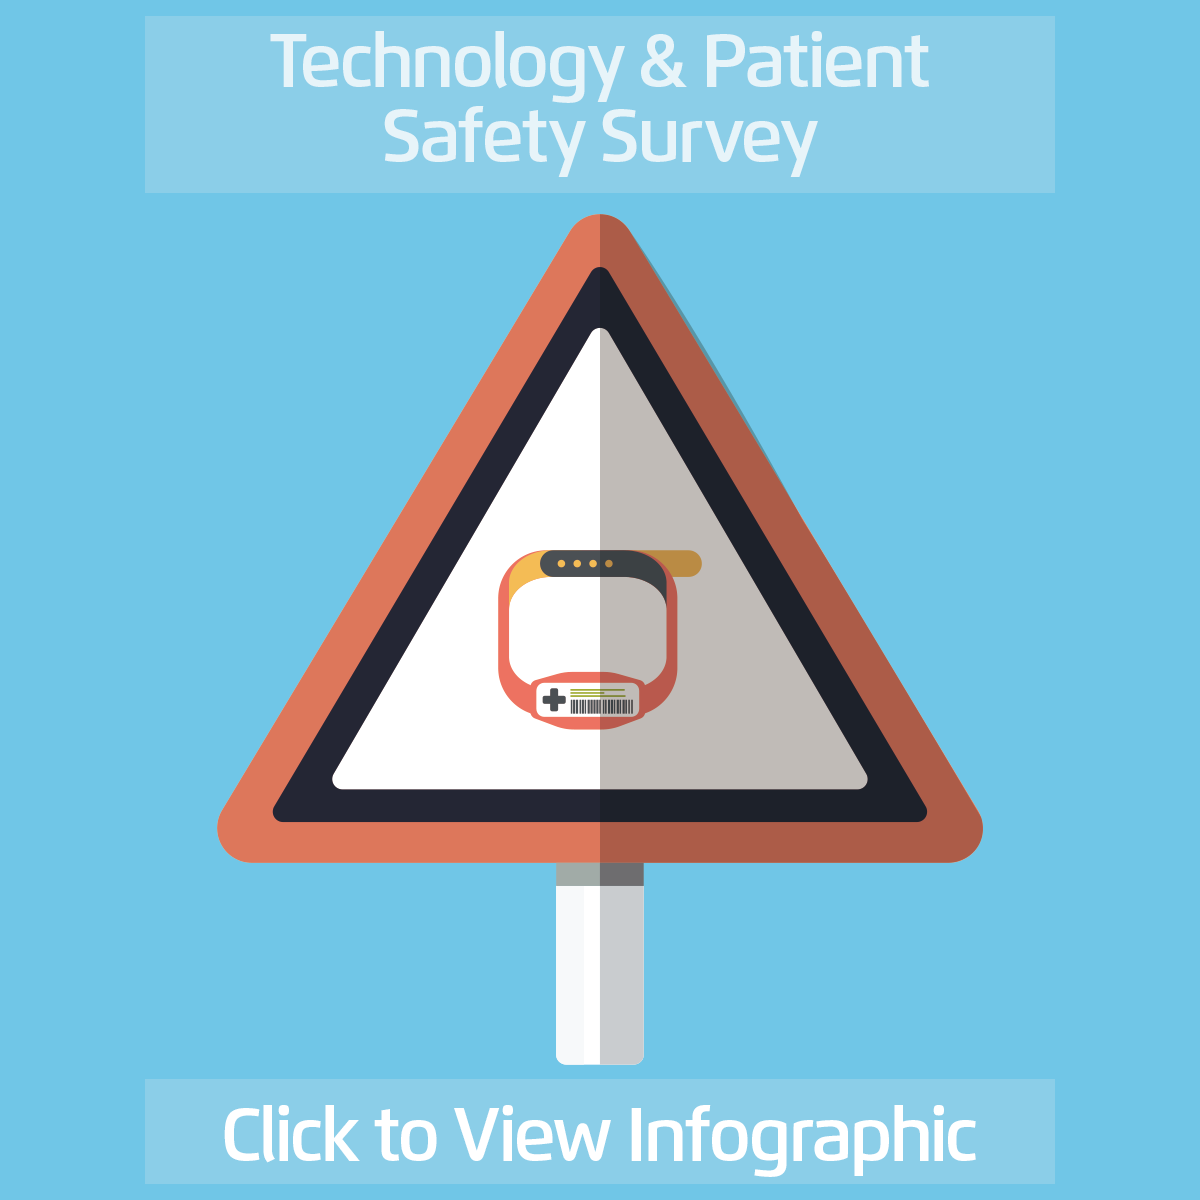 Technology & Patient Safety Survey infographic cover